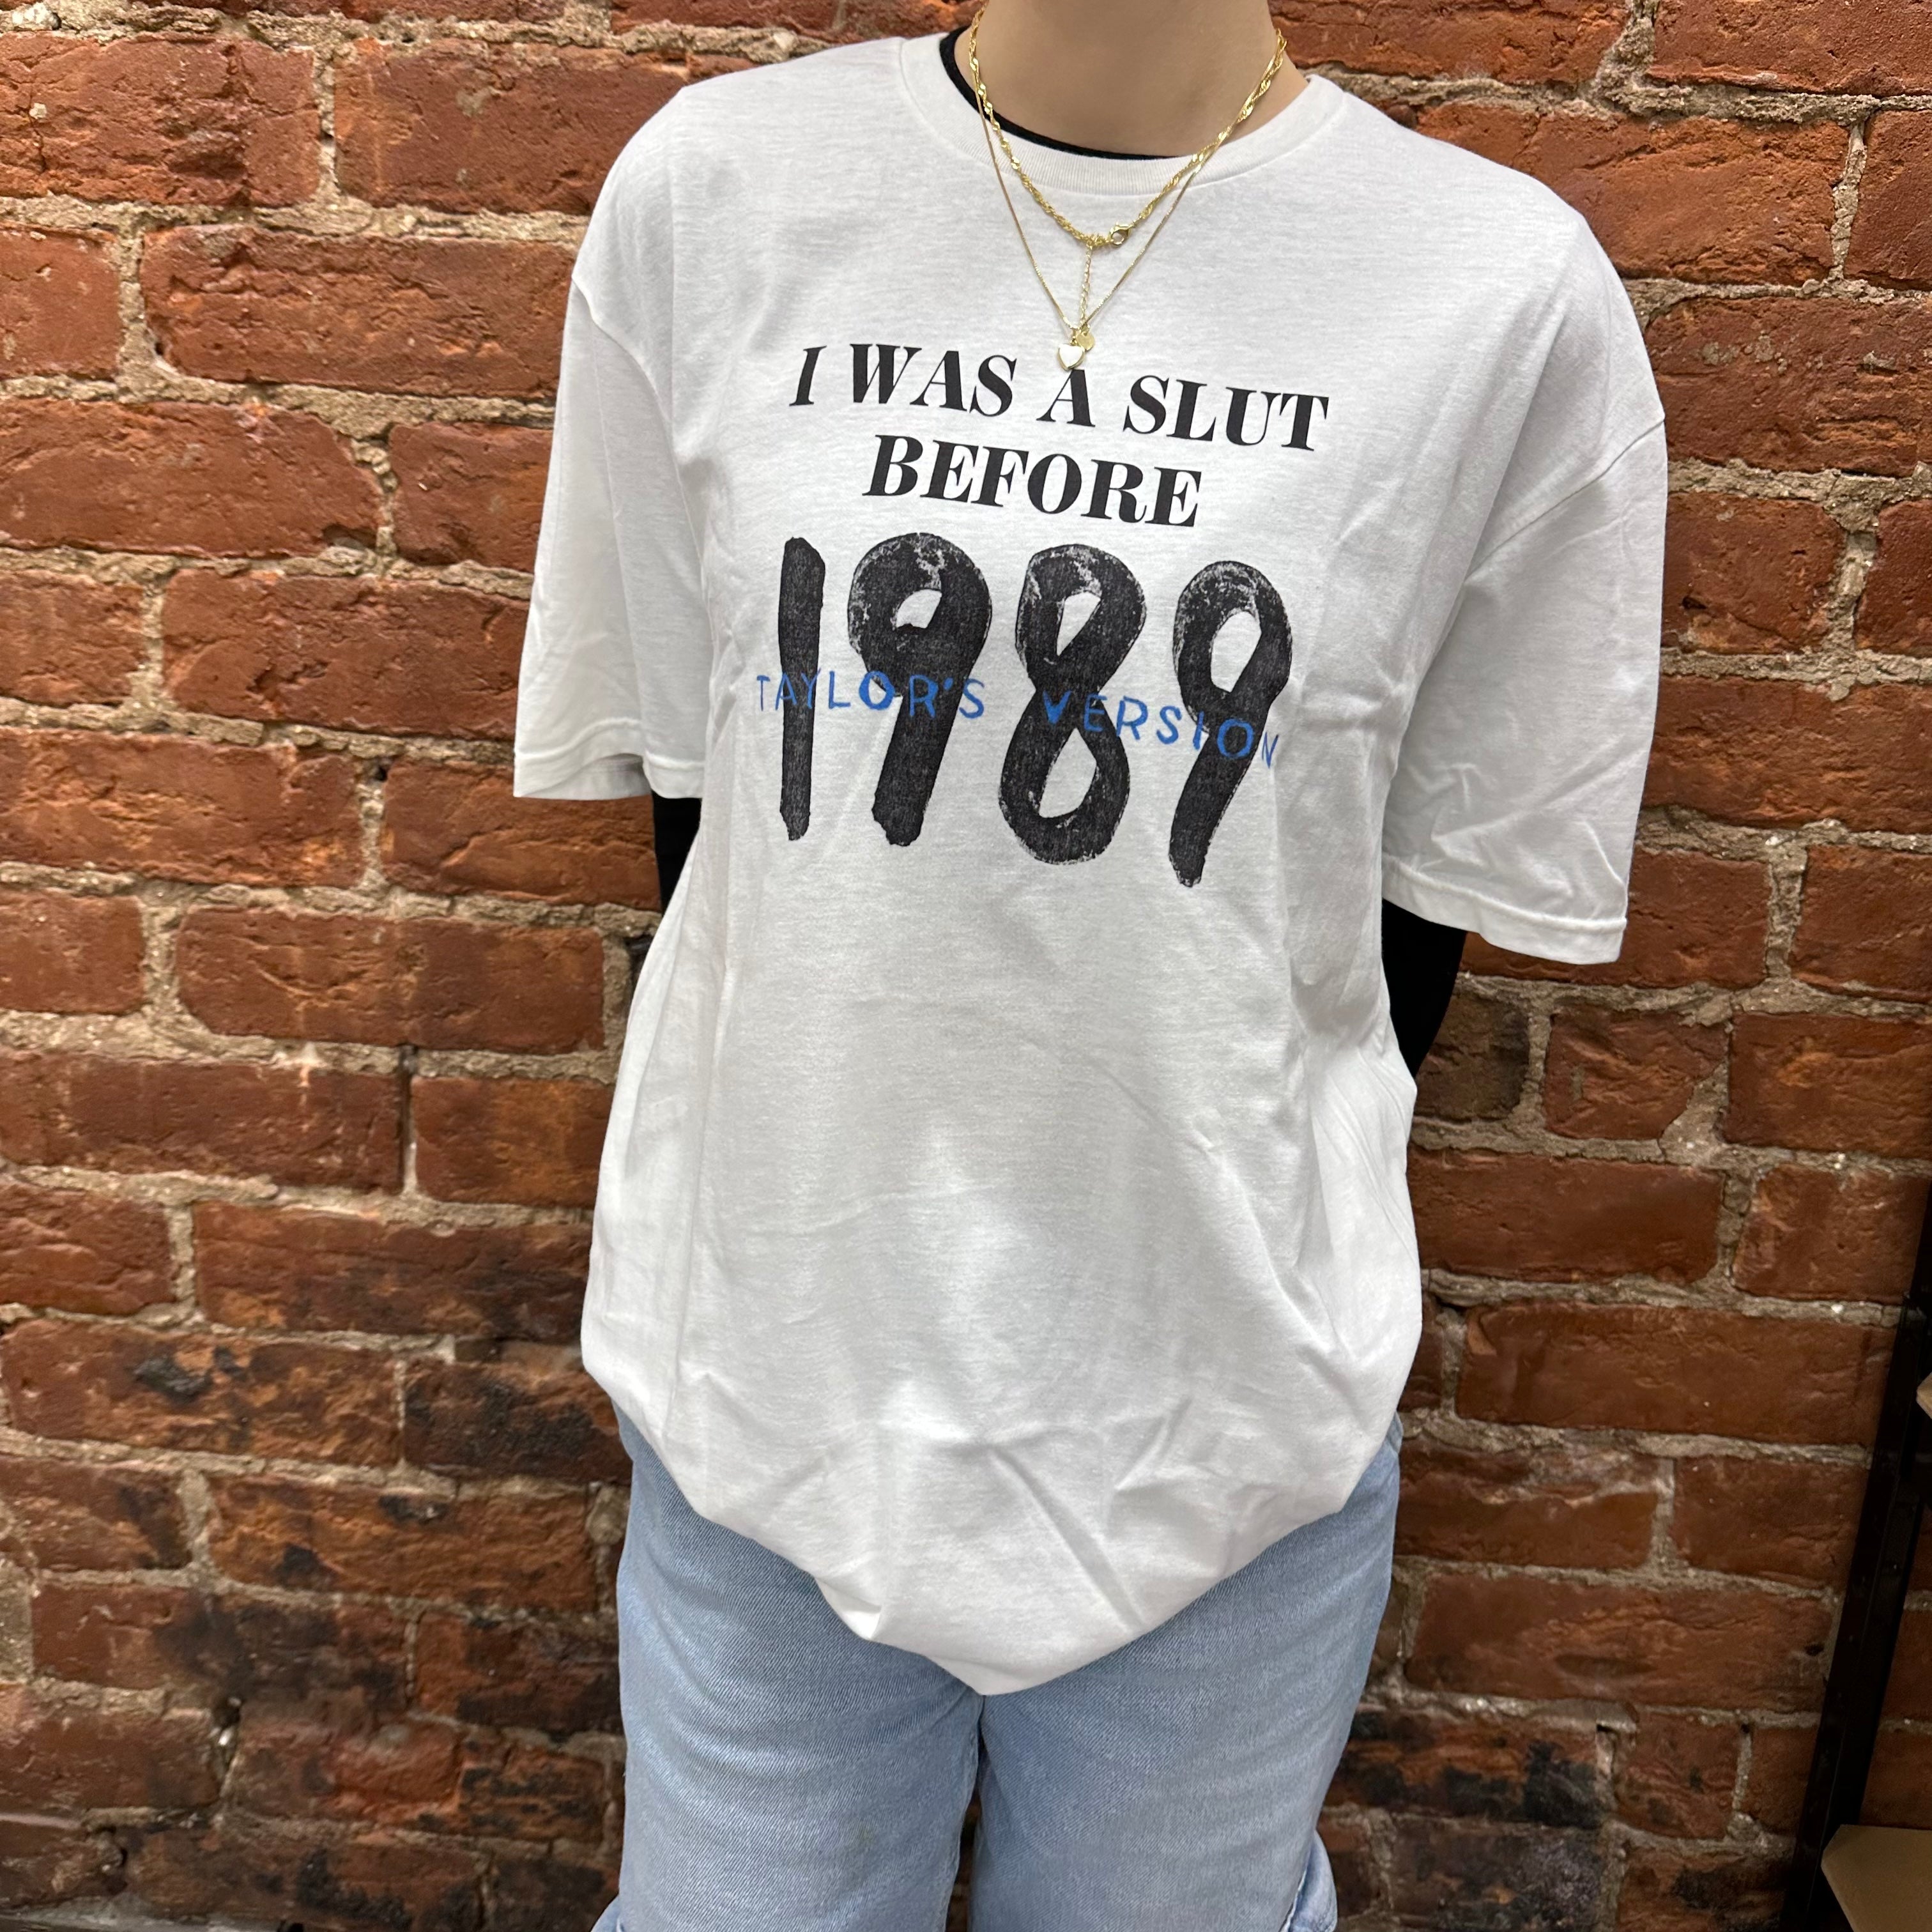 I was a slut before 1989 tv graphic tee